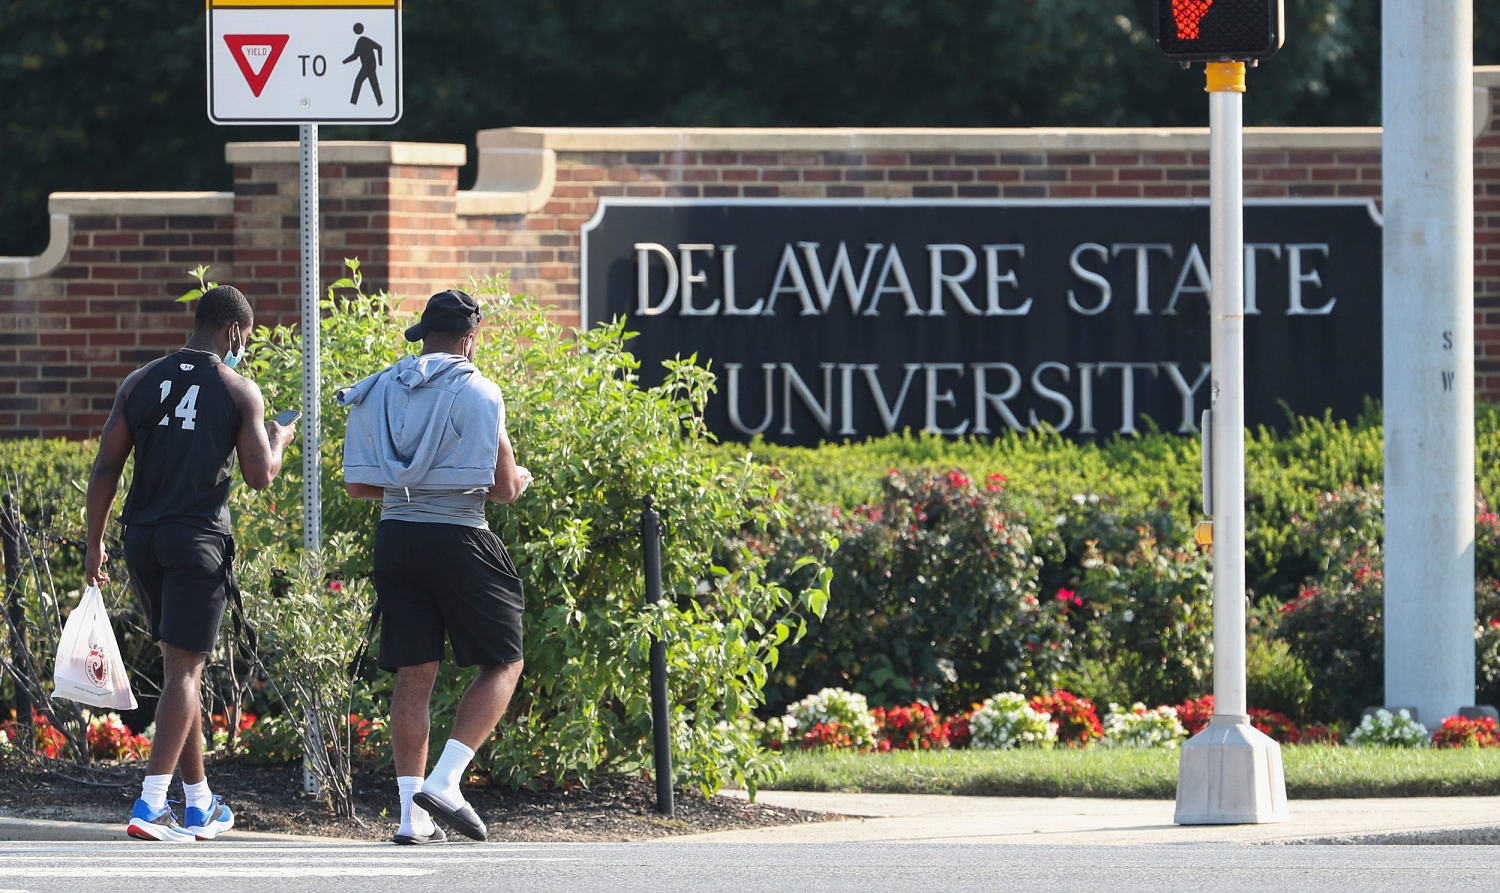 18-year-old woman fatally shot on Delaware State University campus